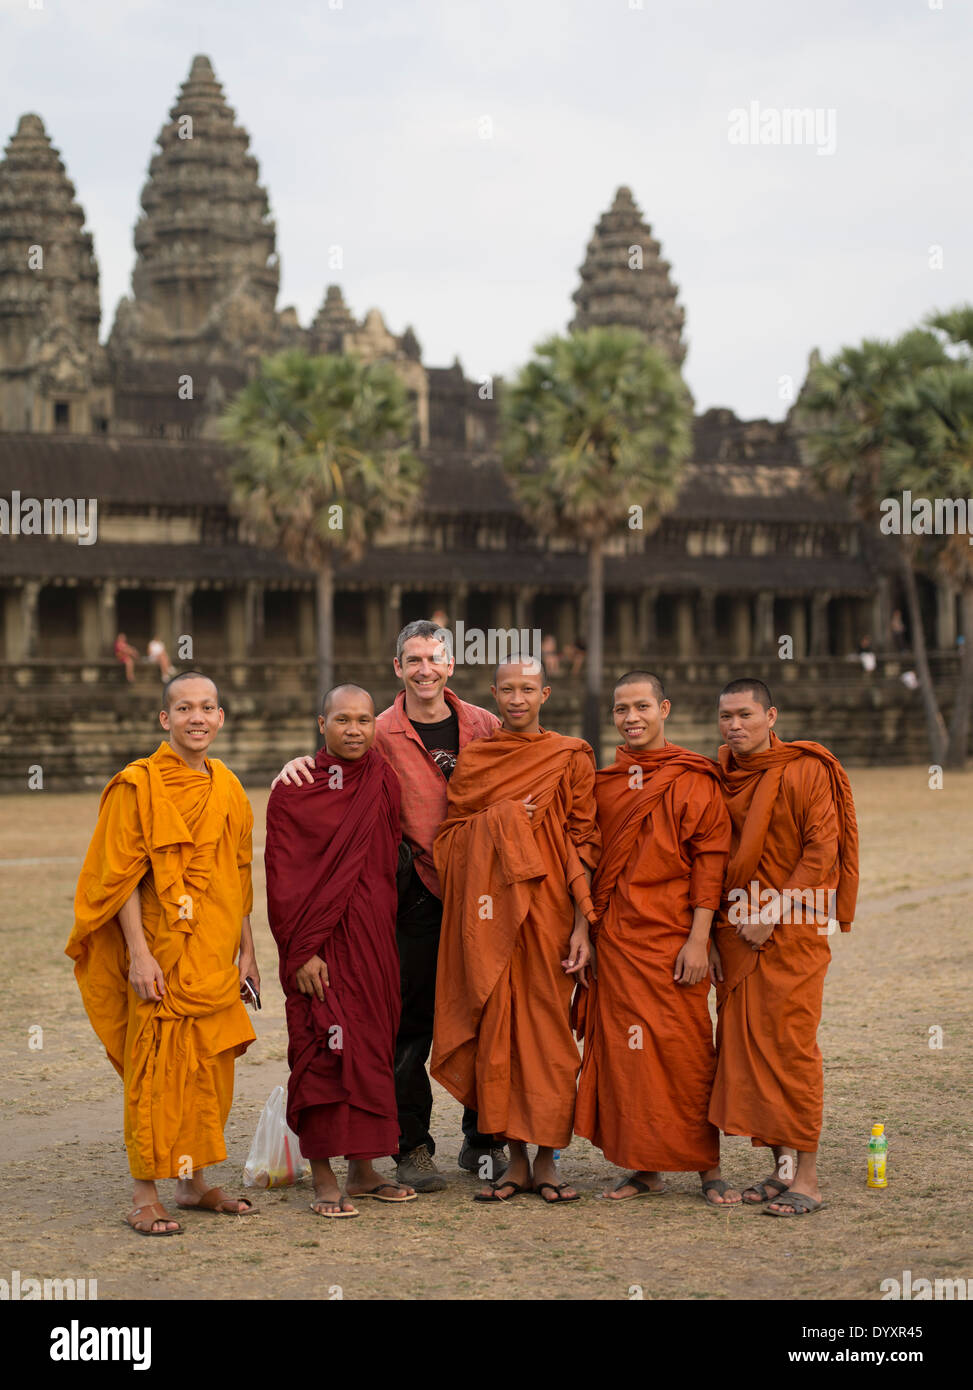 Western tourist with Buddhist monks in traditional robes at Angkor Wat, Siem Reap, Cambodia Stock Photo